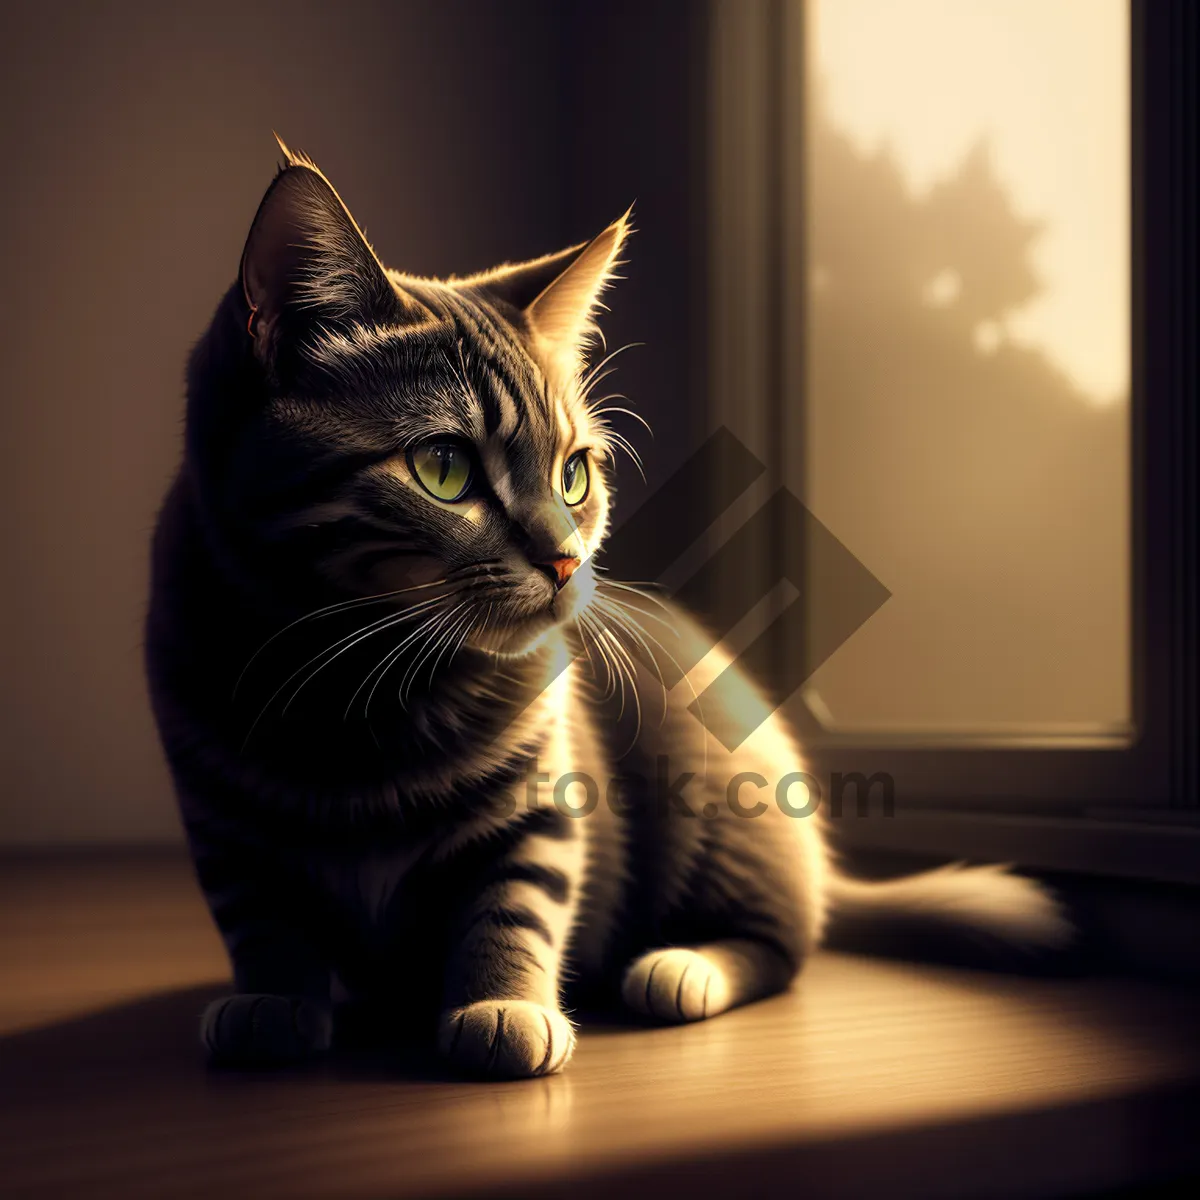 Picture of Furry Friend on Windowsill: Adorable Domestic Cat